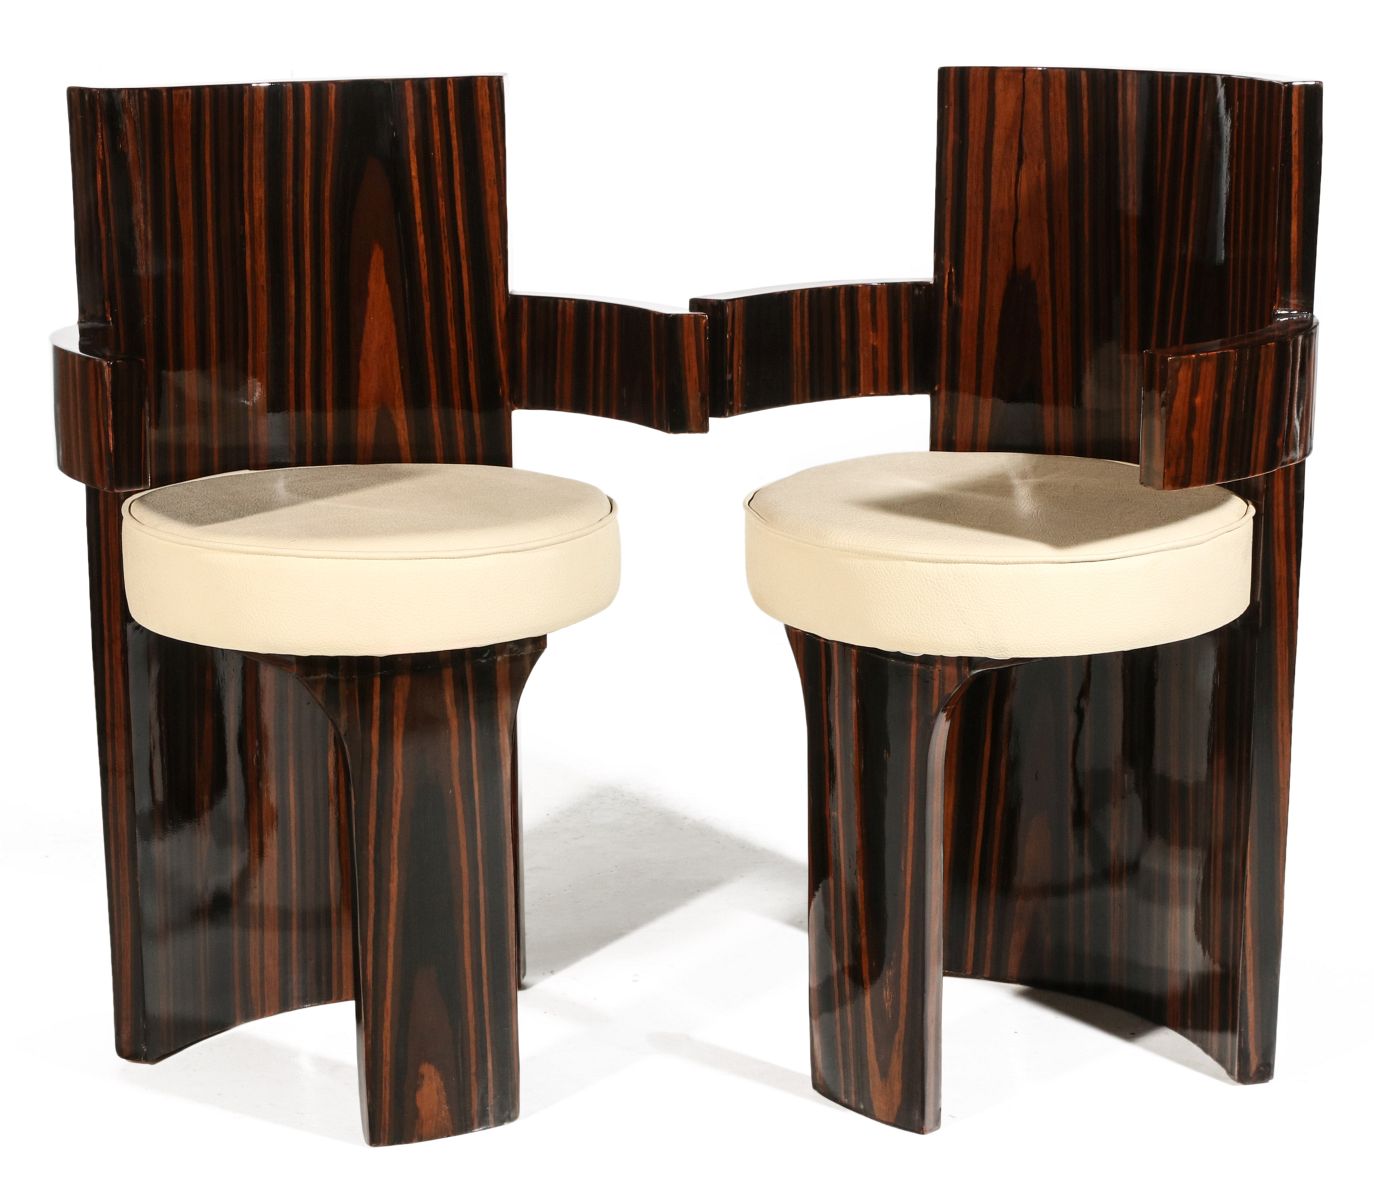 A PAIR CONTEMPORARY ZEBRA WOOD BARREL CHAIRS